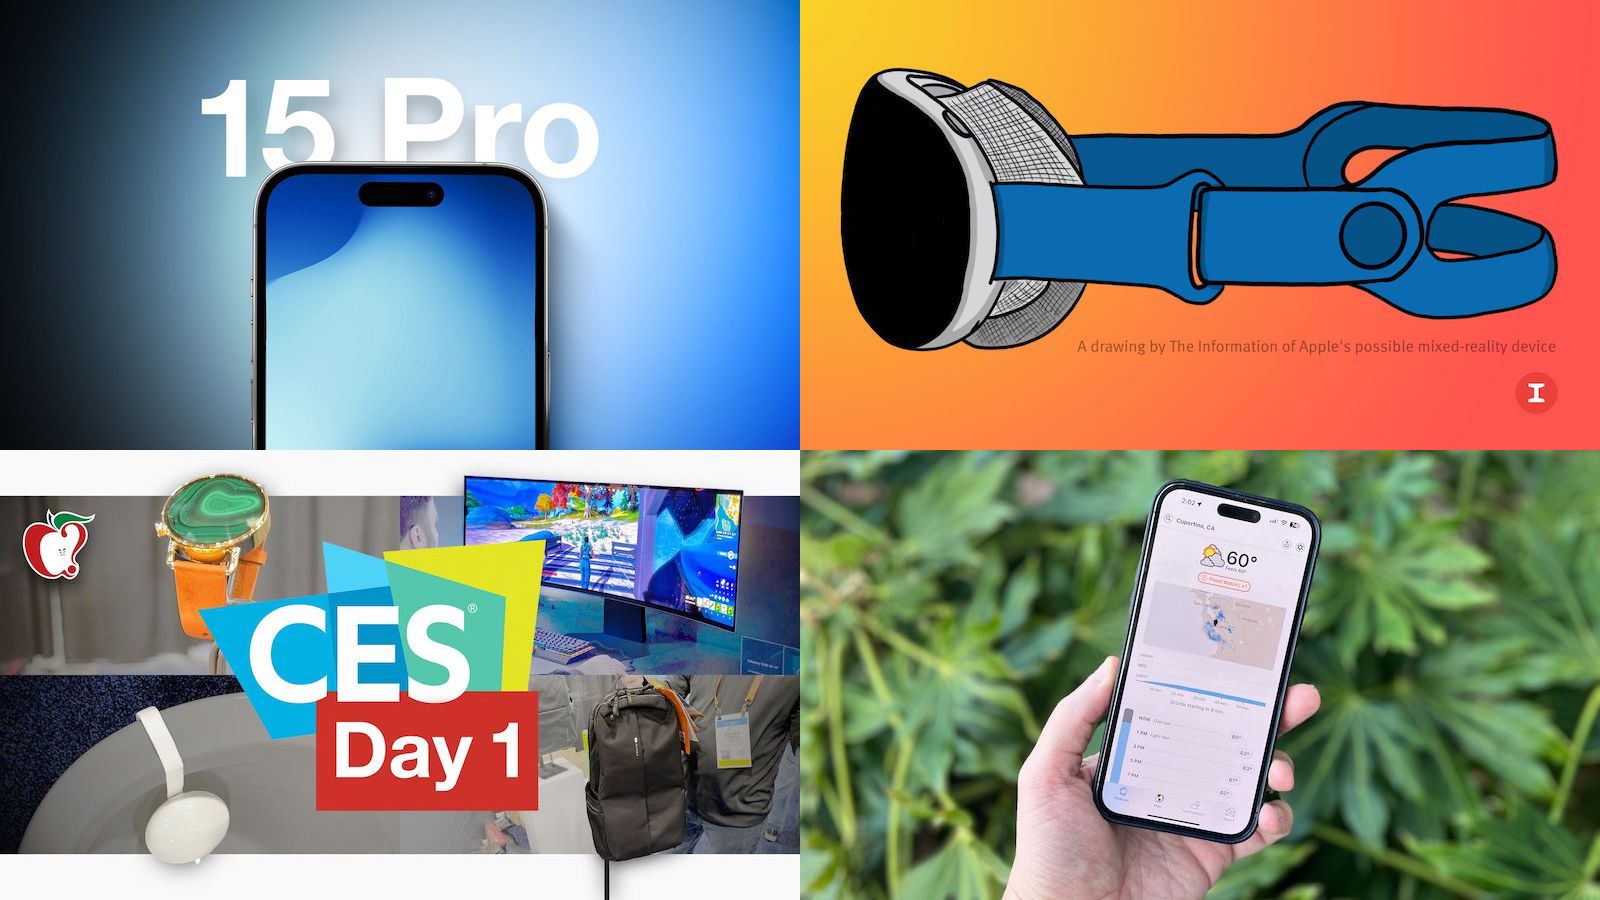 Top Stories: iPhone 15 Pro and Headset Rumors, CES 2023, Dark Sky Shutdown, and ..